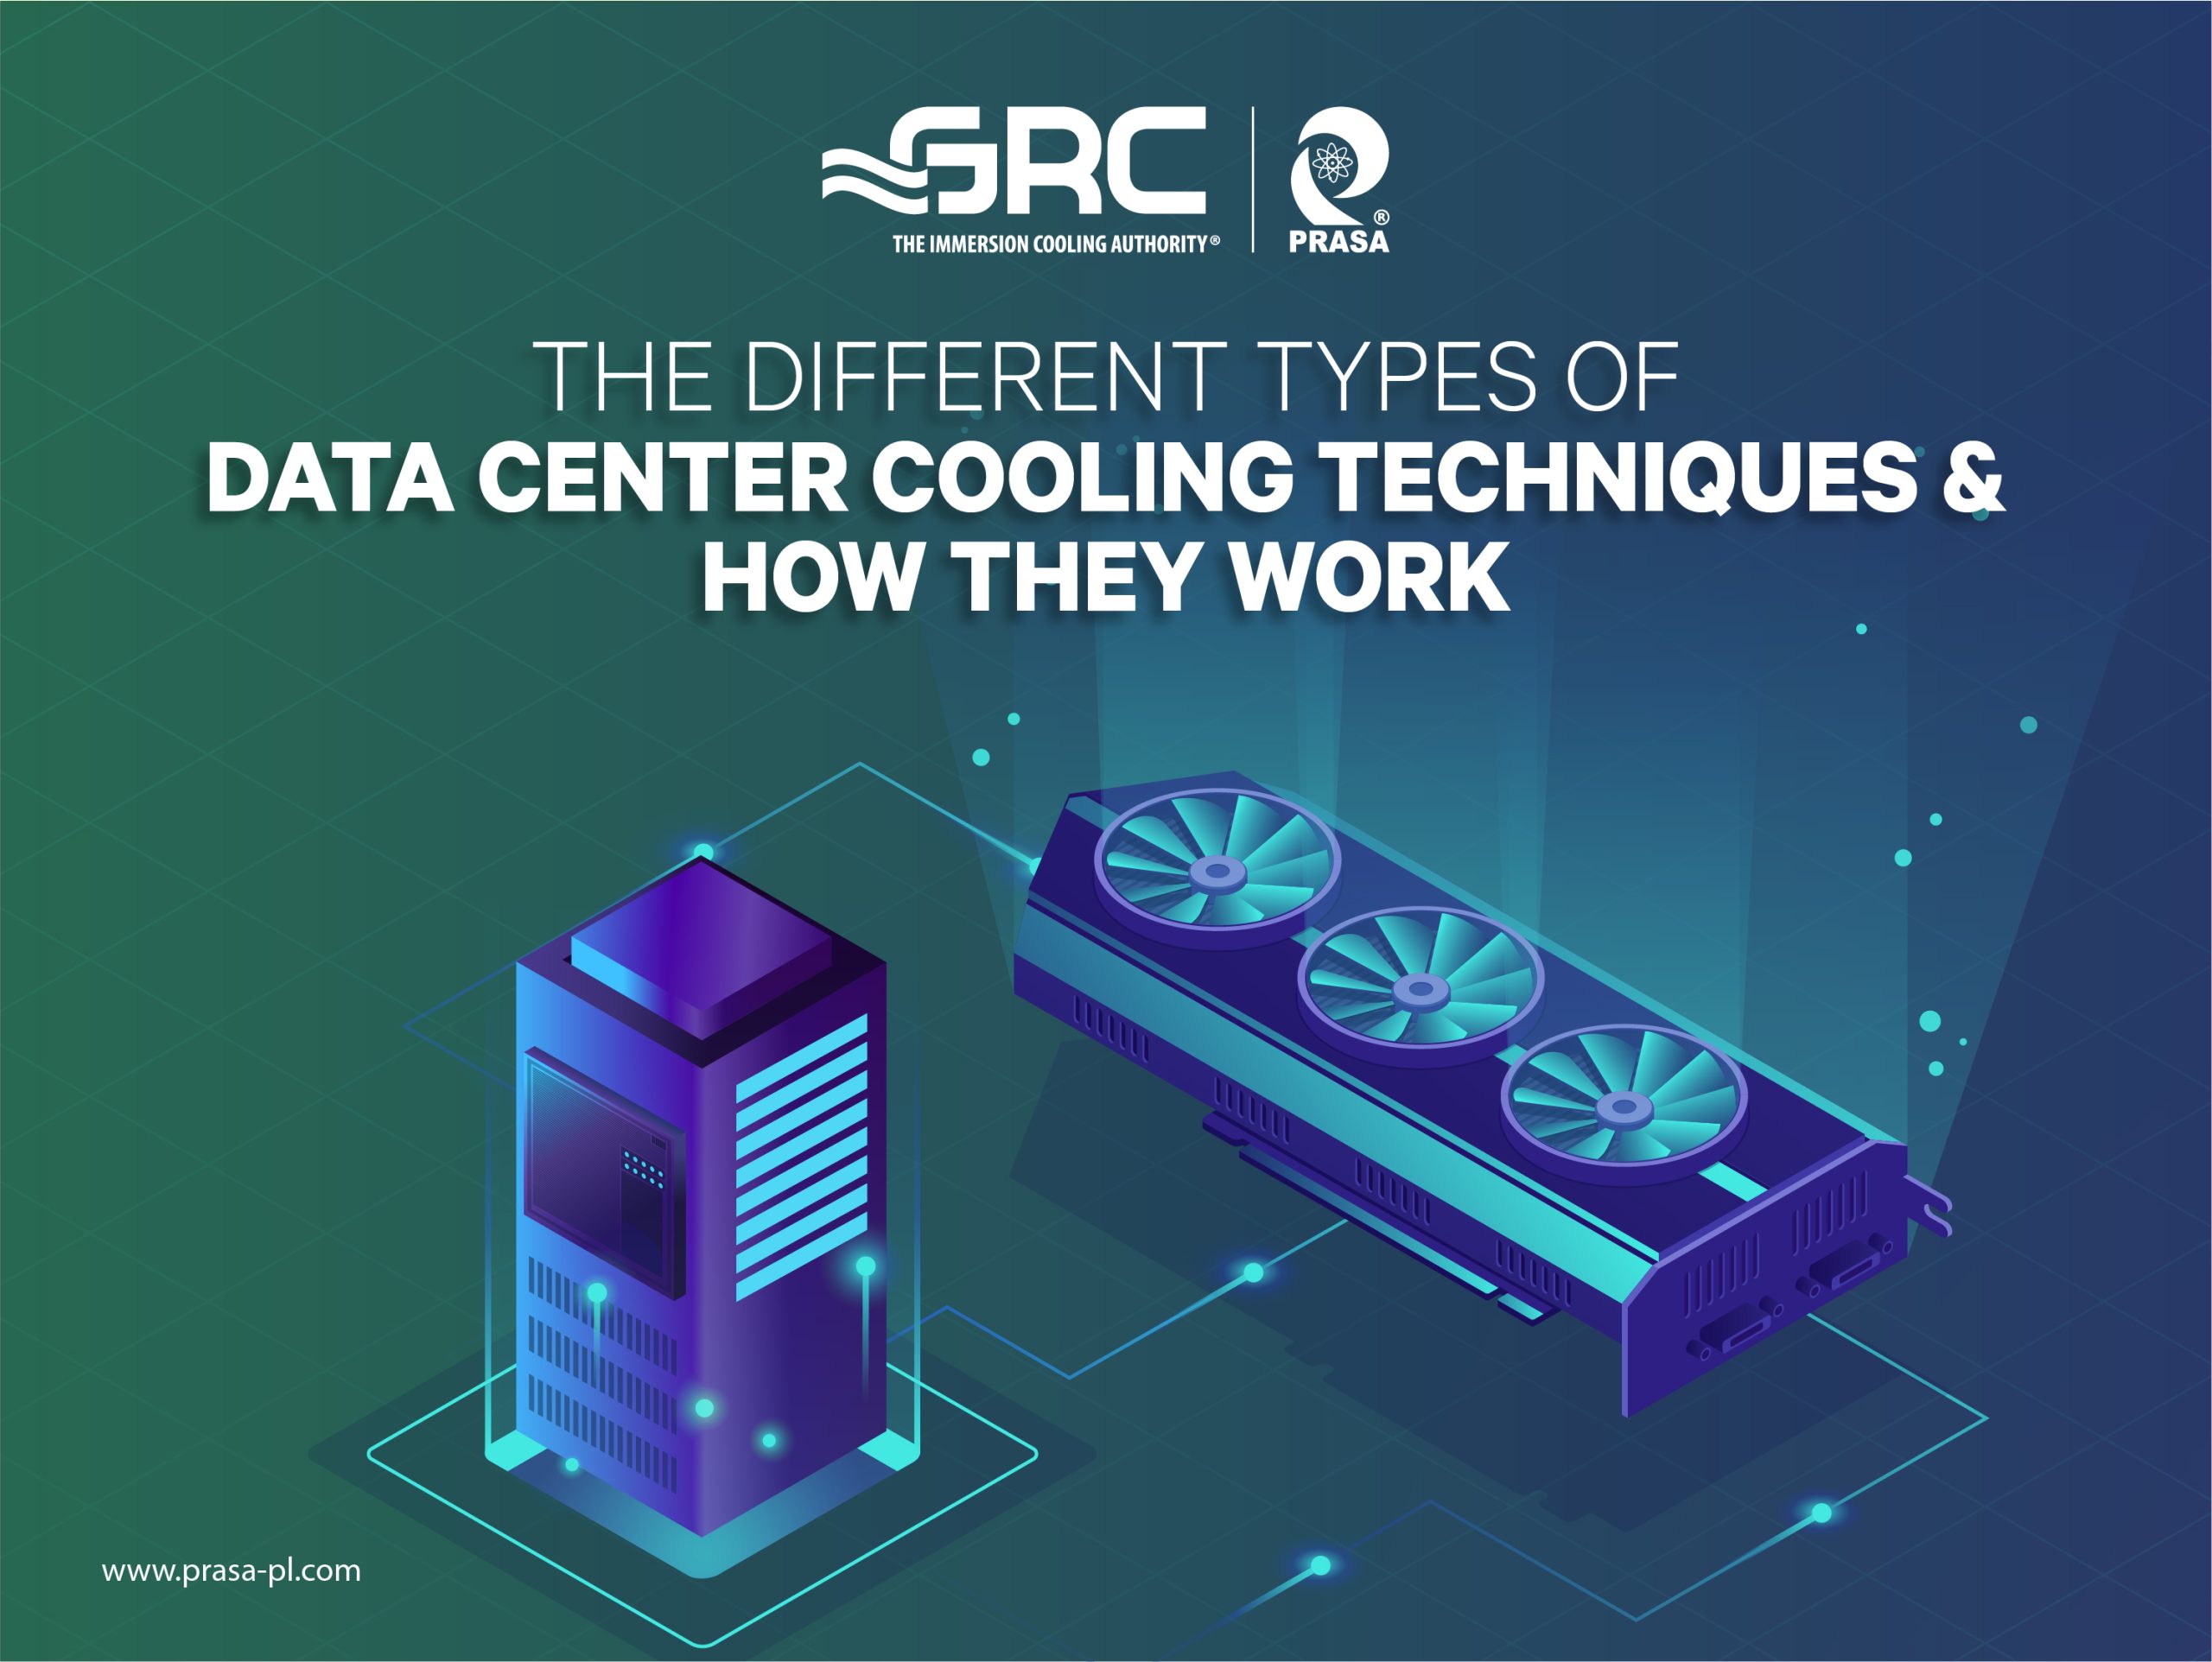 <strong>The Different Types of Data Center Cooling Techniques and How They Work</strong>